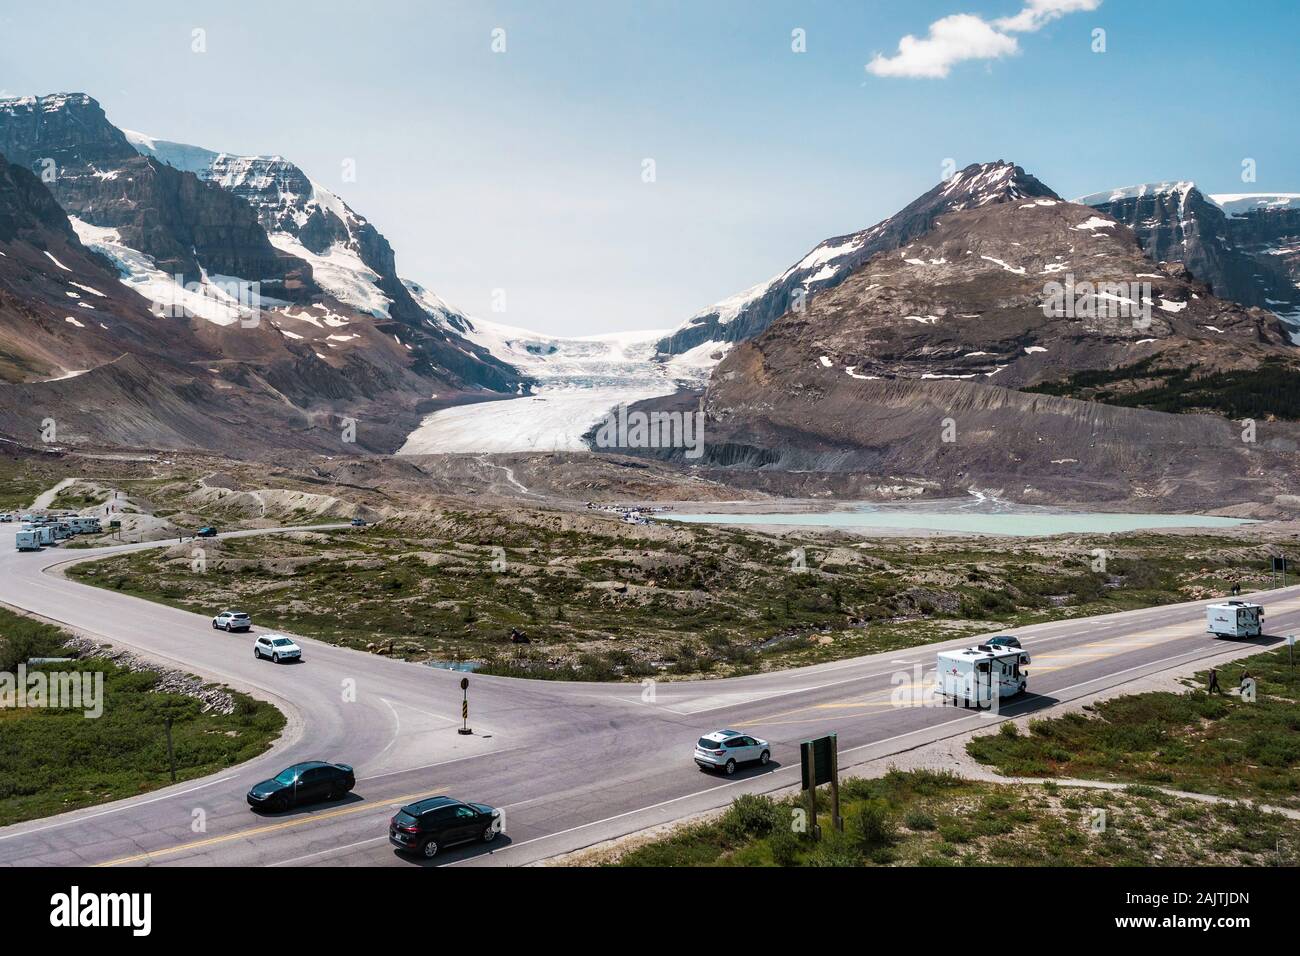 View of Athabasca Glacier with vehicles driving by on the famous Icefields Parkway route between Jasper and Banff National Parks in Alberta, Canada. Stock Photo